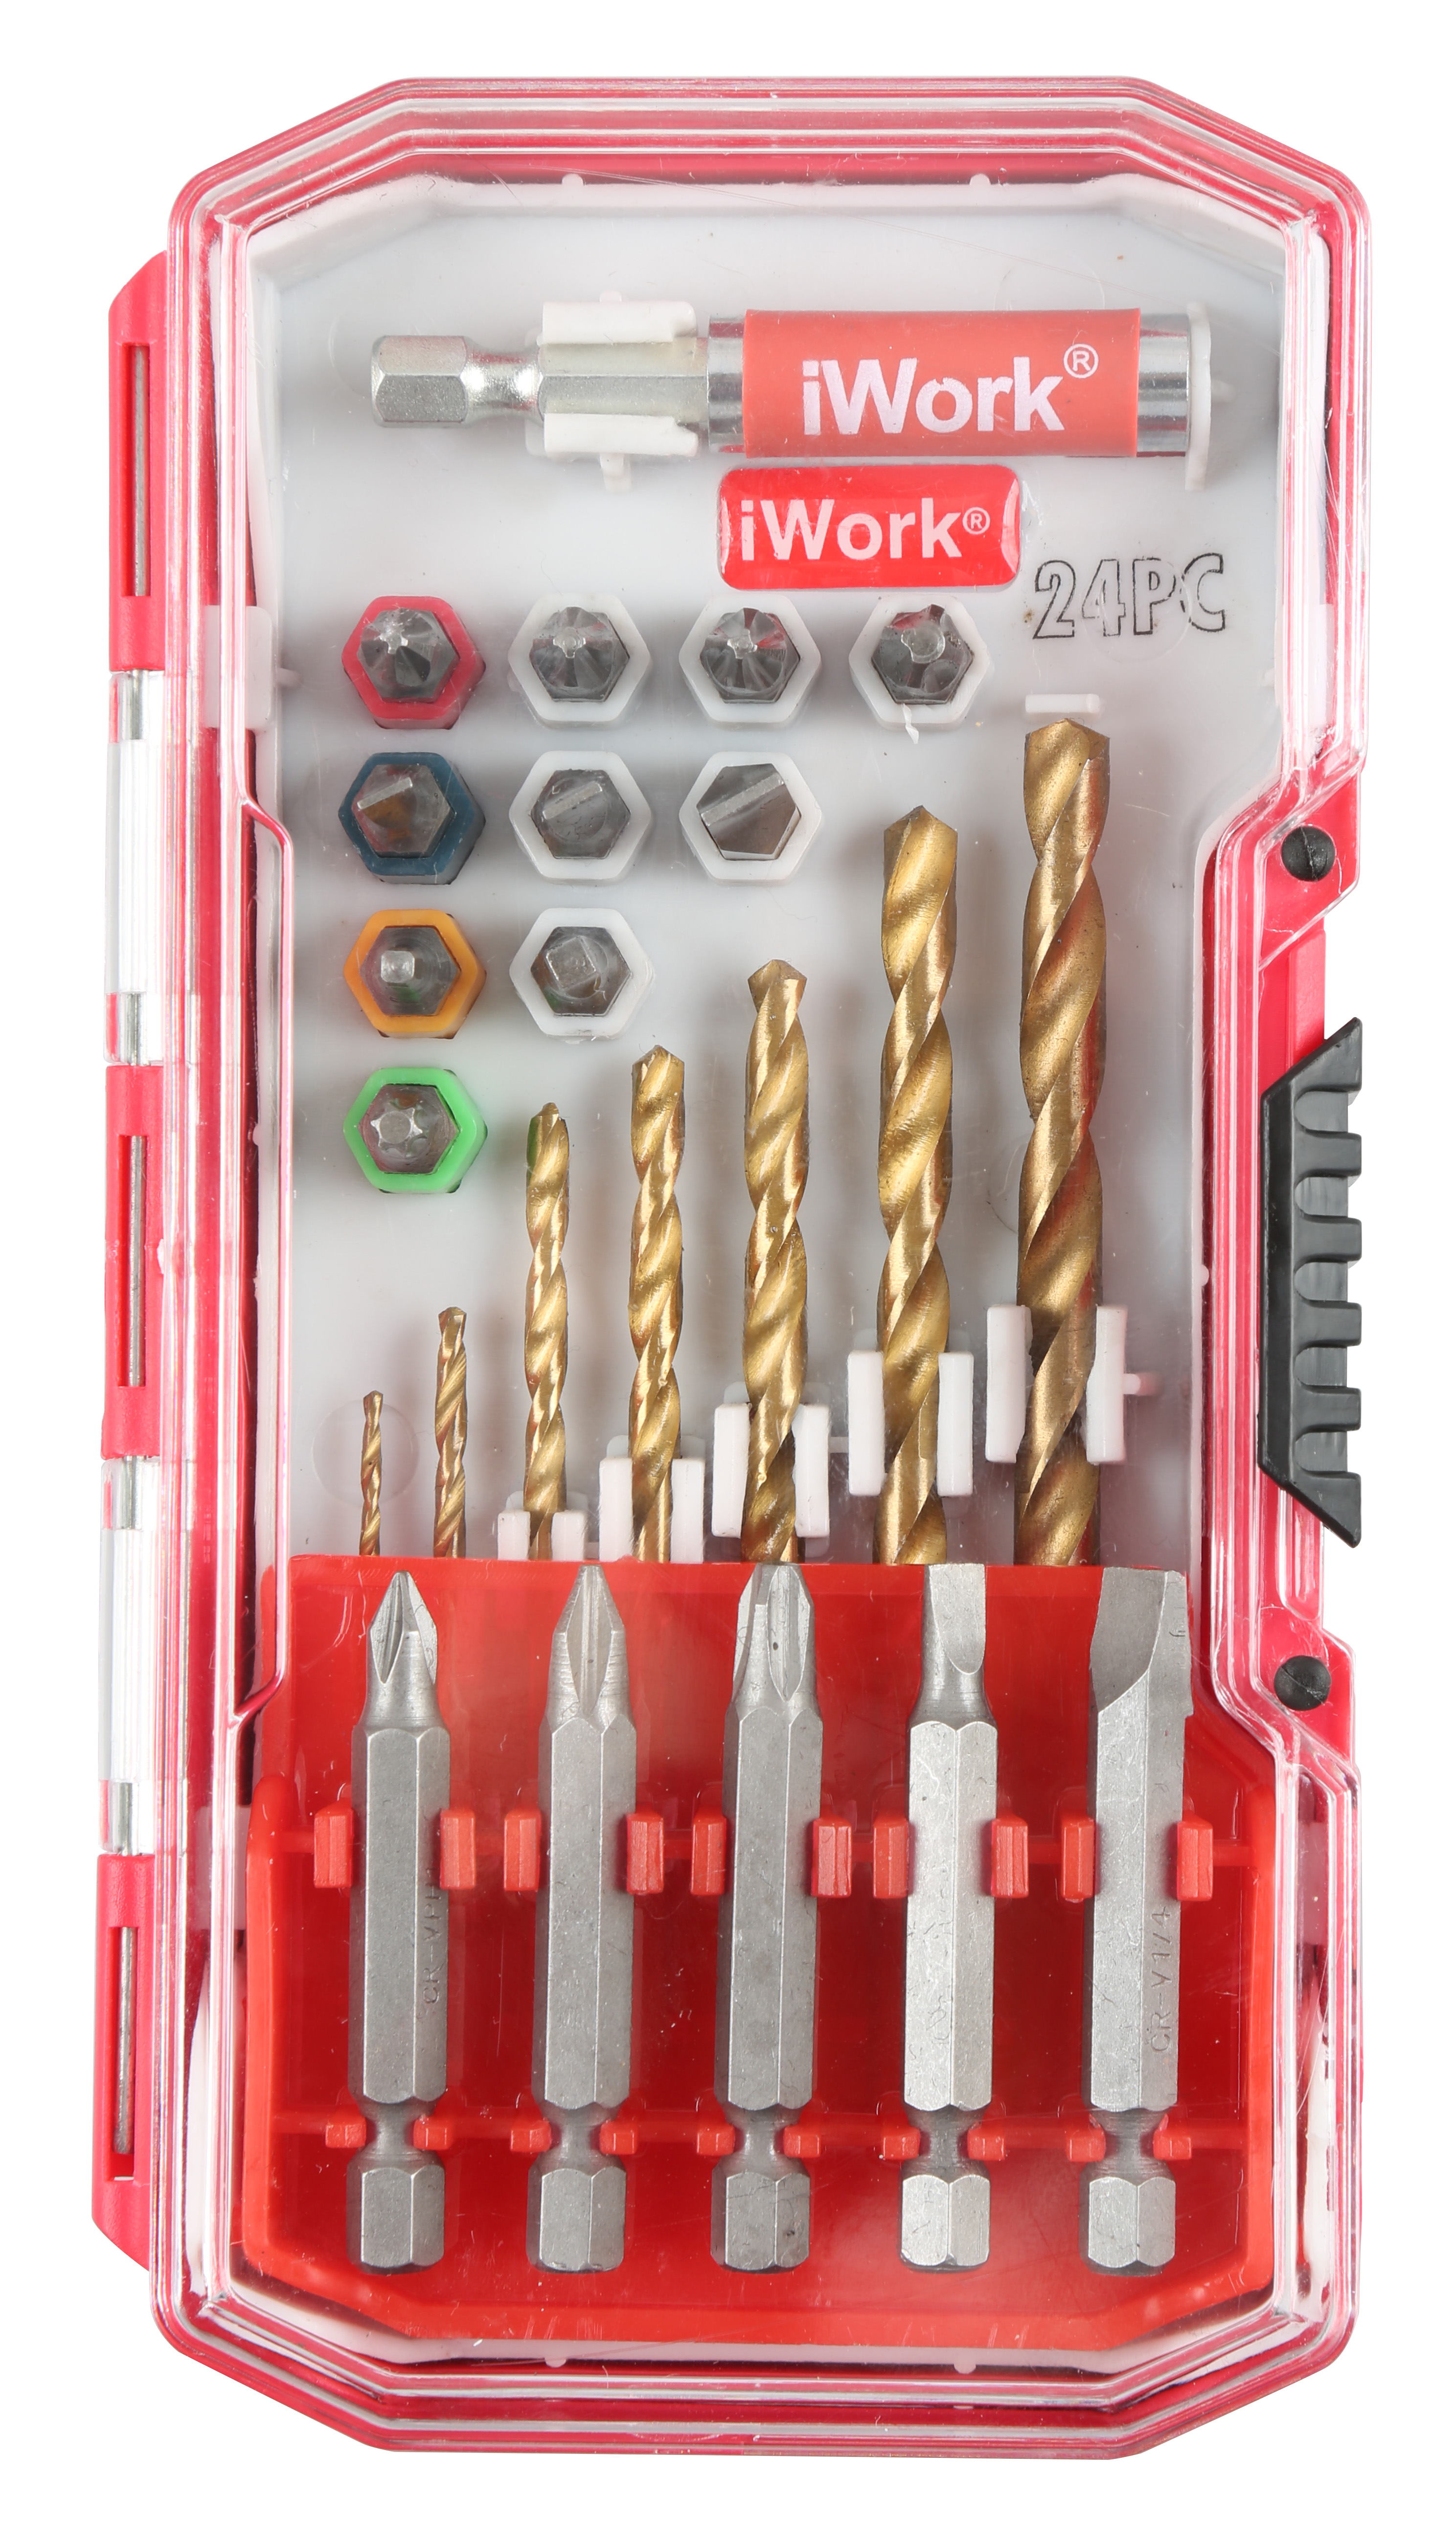 iWork 24PC DRILL AND DRIVER BITS SET